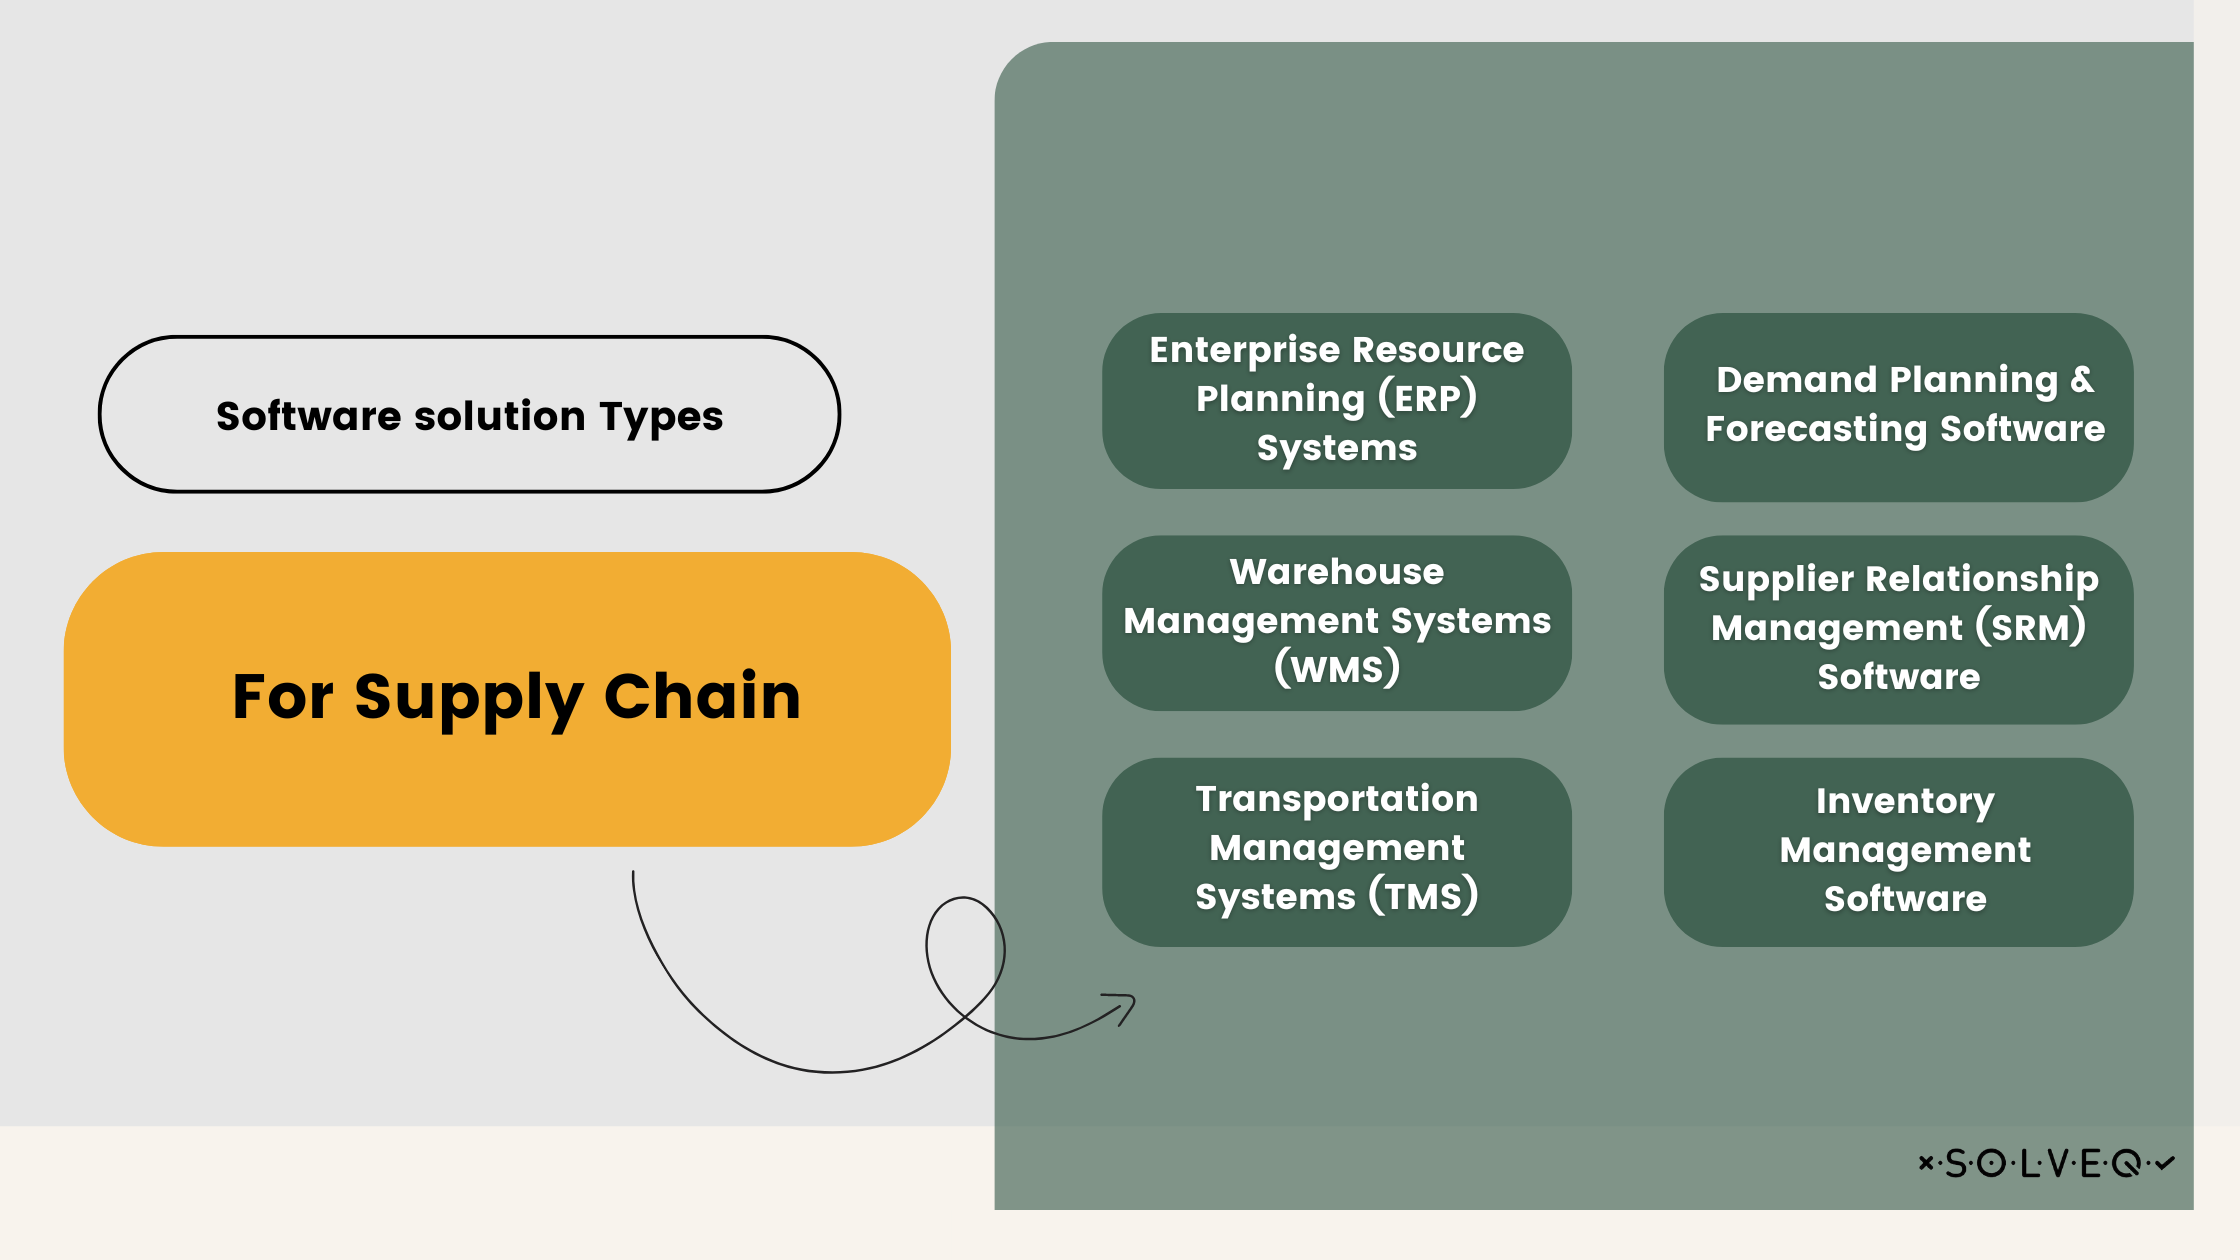 Software solution Types For Supply Chain